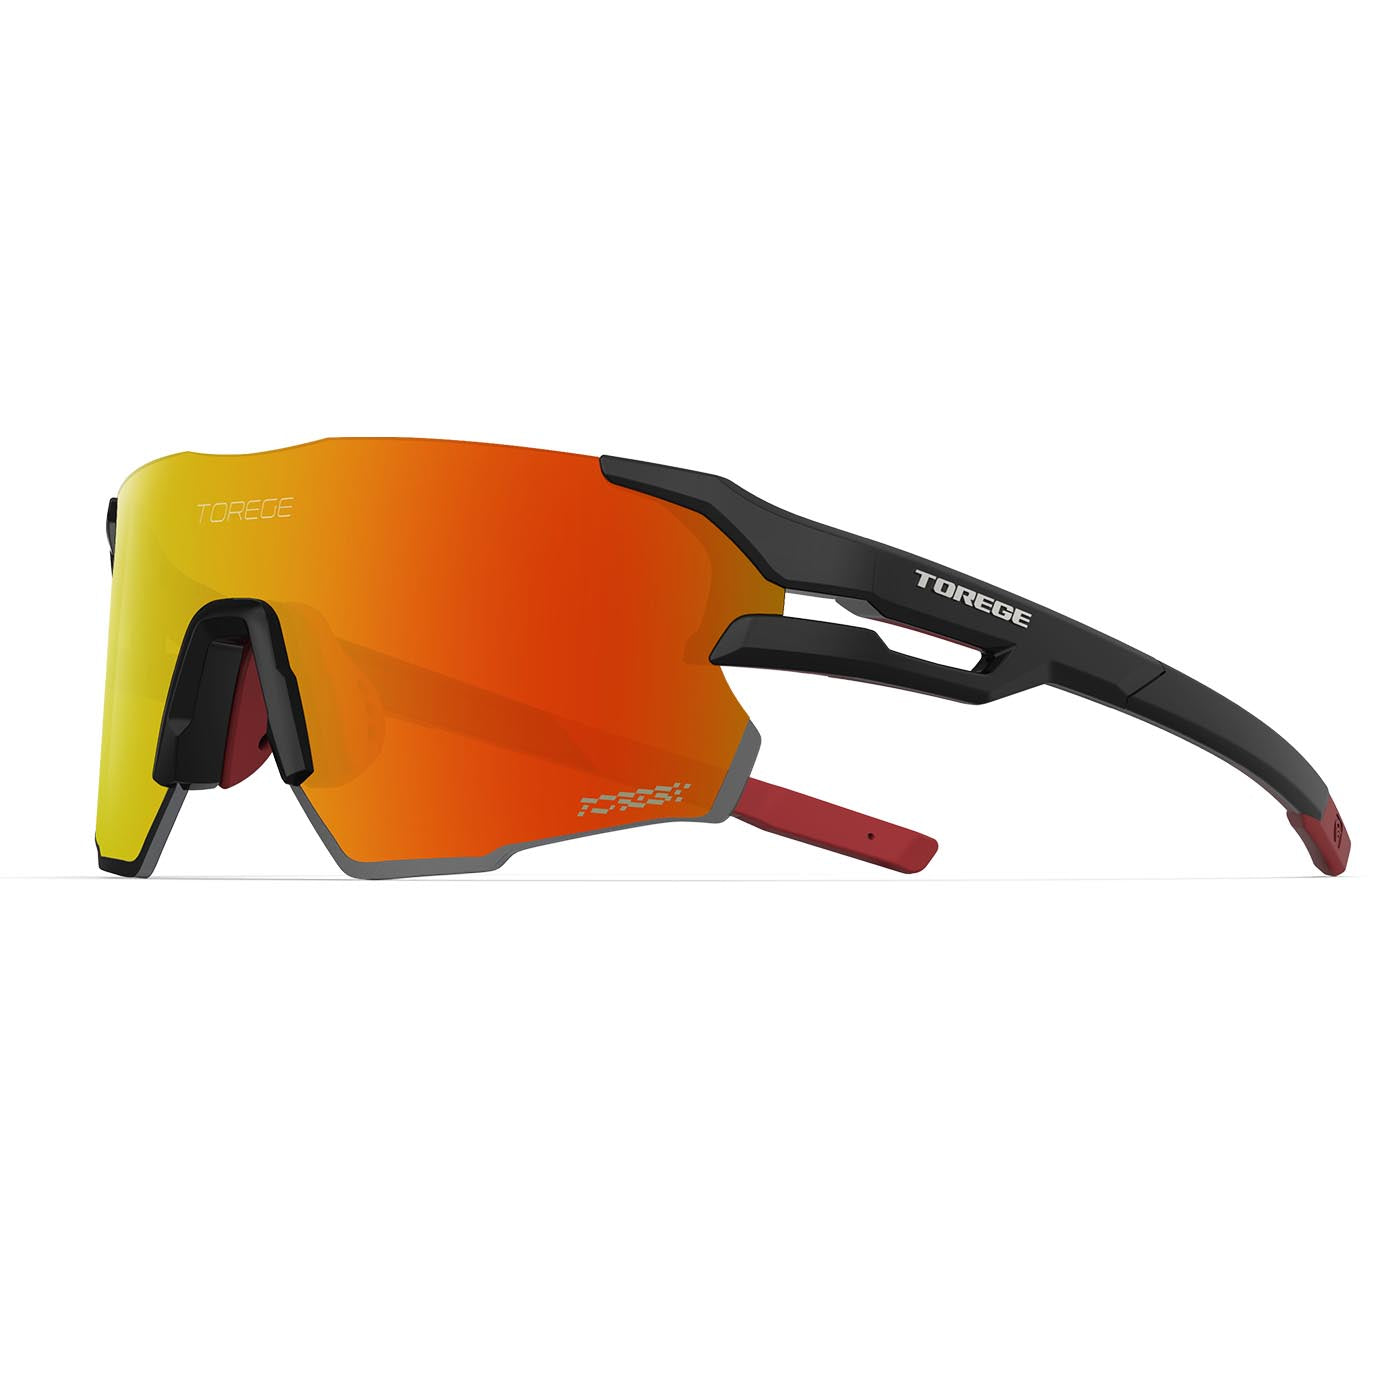 Resplenden Ultra Lightweight Wraparound Sport Sunglasses for Active Men and  Women With Lifetime Warranty - Perfect for Cycling, Hiking, Fishing, Golf,  and Running - Black Frame & Sunlight Orange Lens